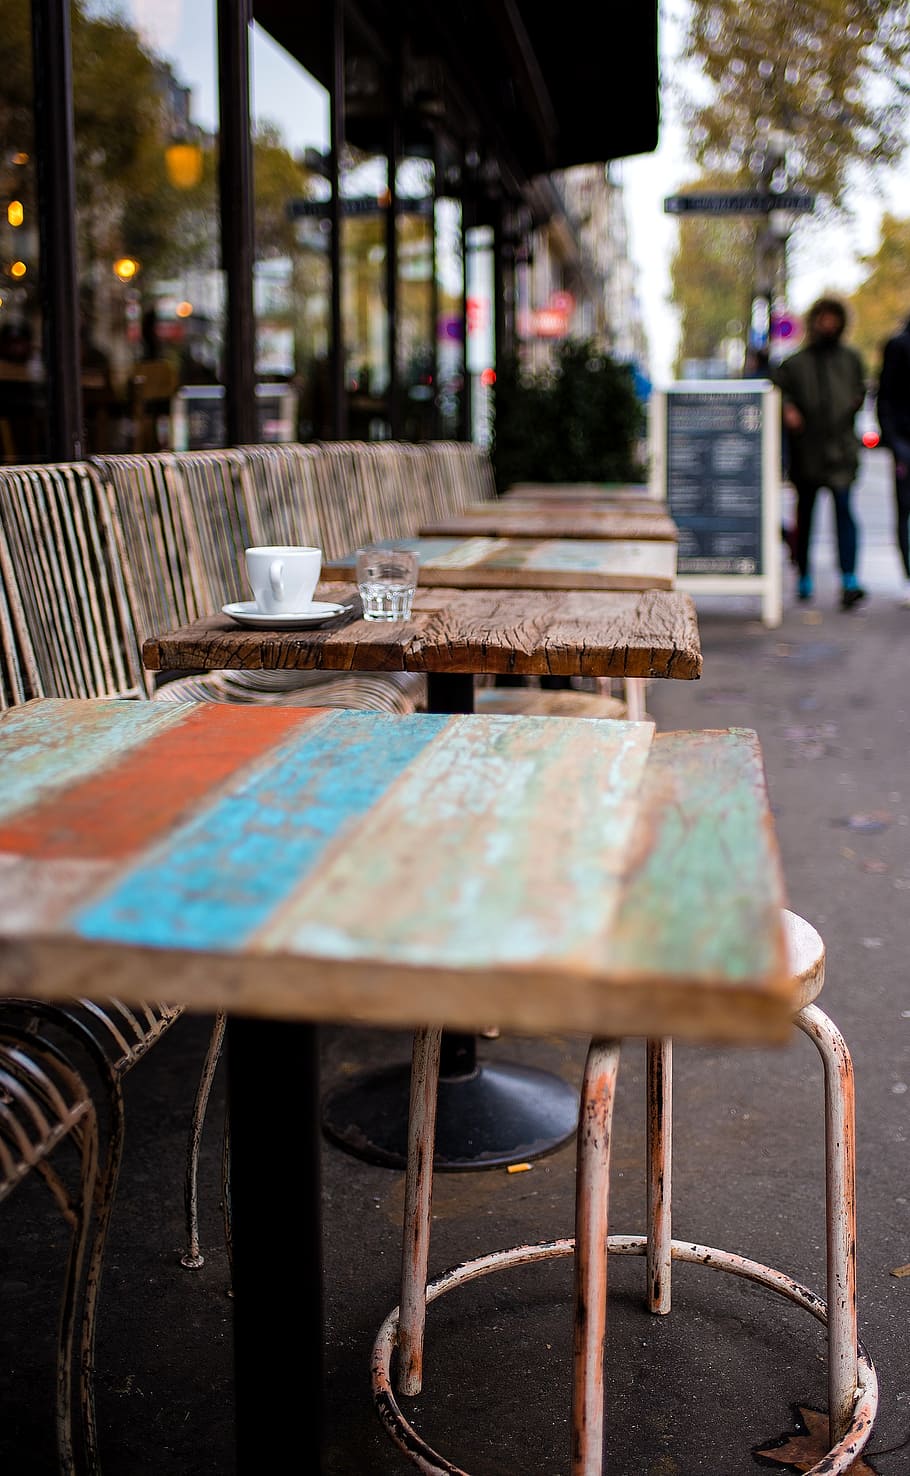 Paris, 2016, ceramic, cup, wooden, table, rails, seat, chair, food and drink